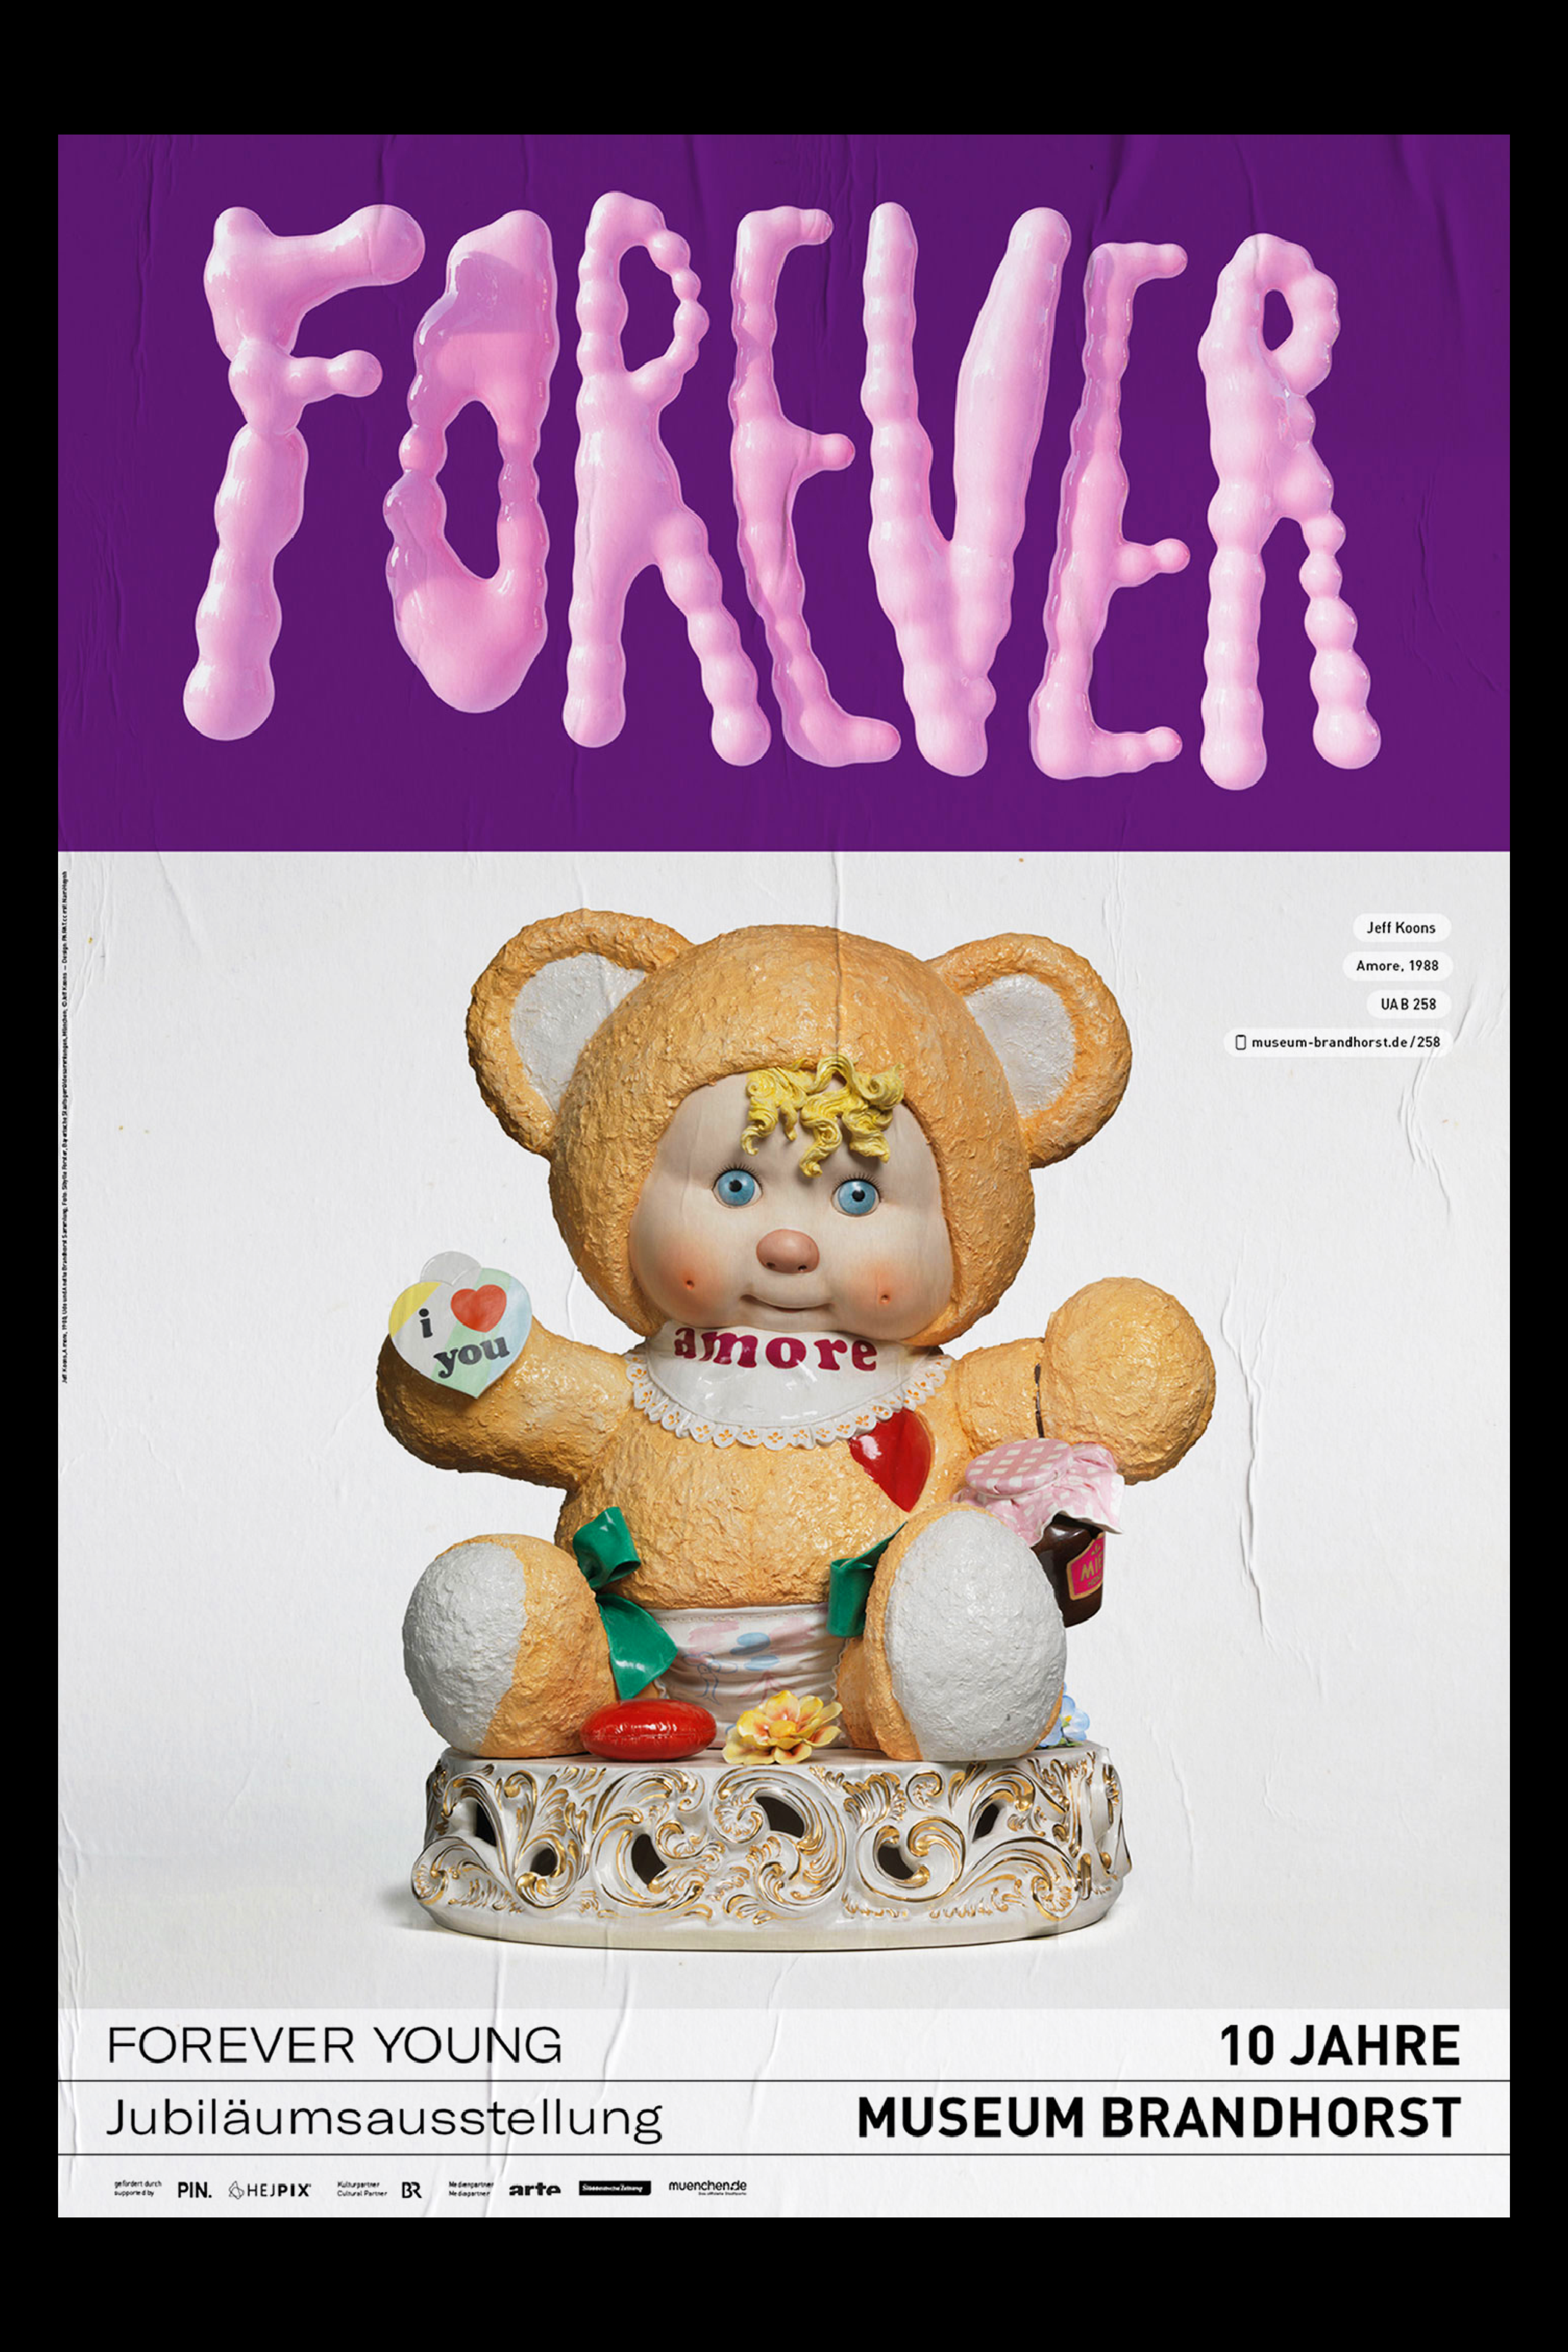 "Forever Young" poster showing an artwork of Jeff Koons.